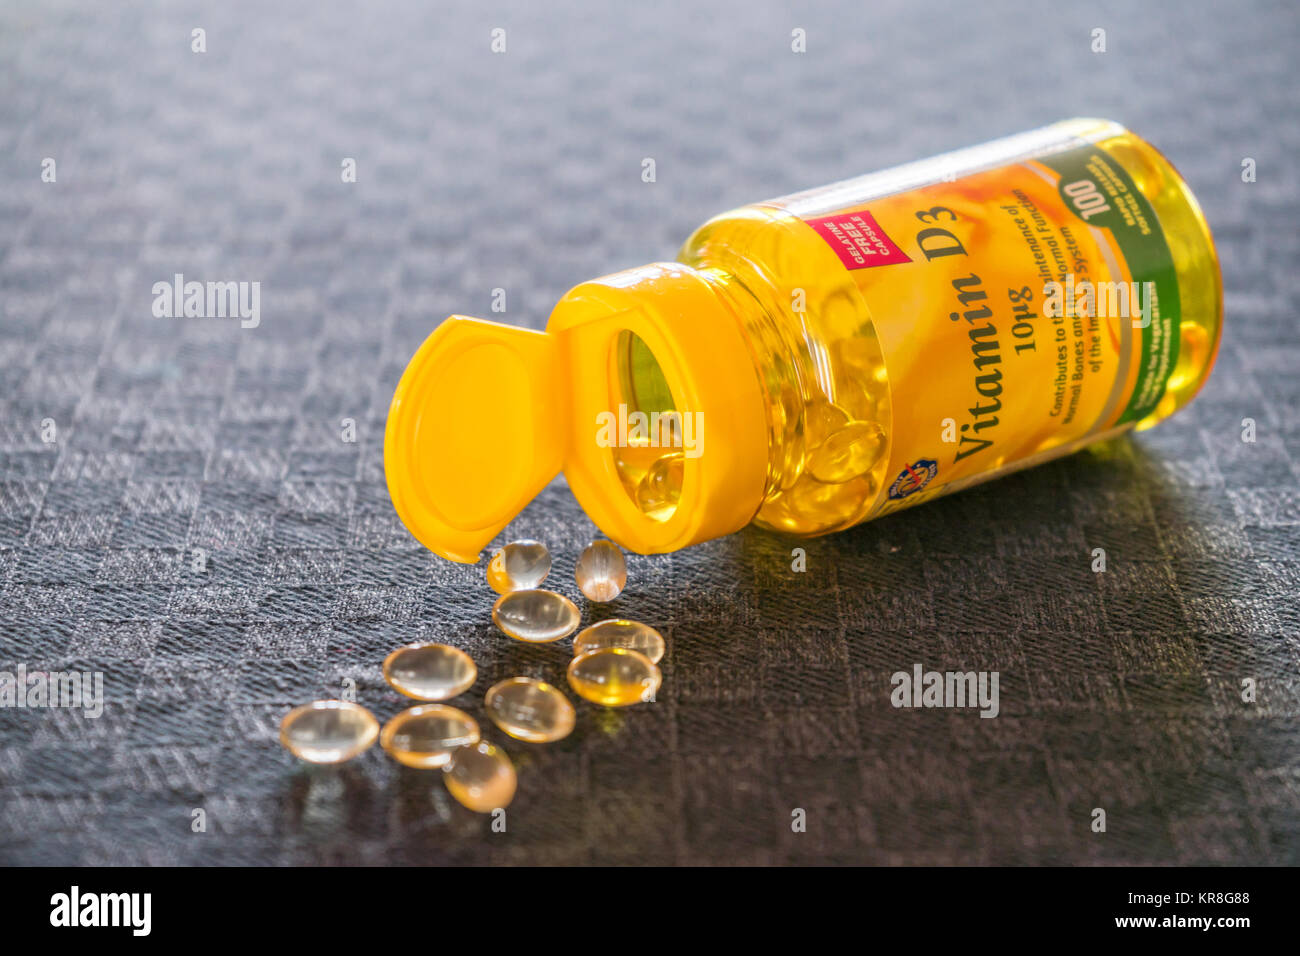 An open bottle of Vitamin D (D3) supplement pills/ tablets against grey background Stock Photo